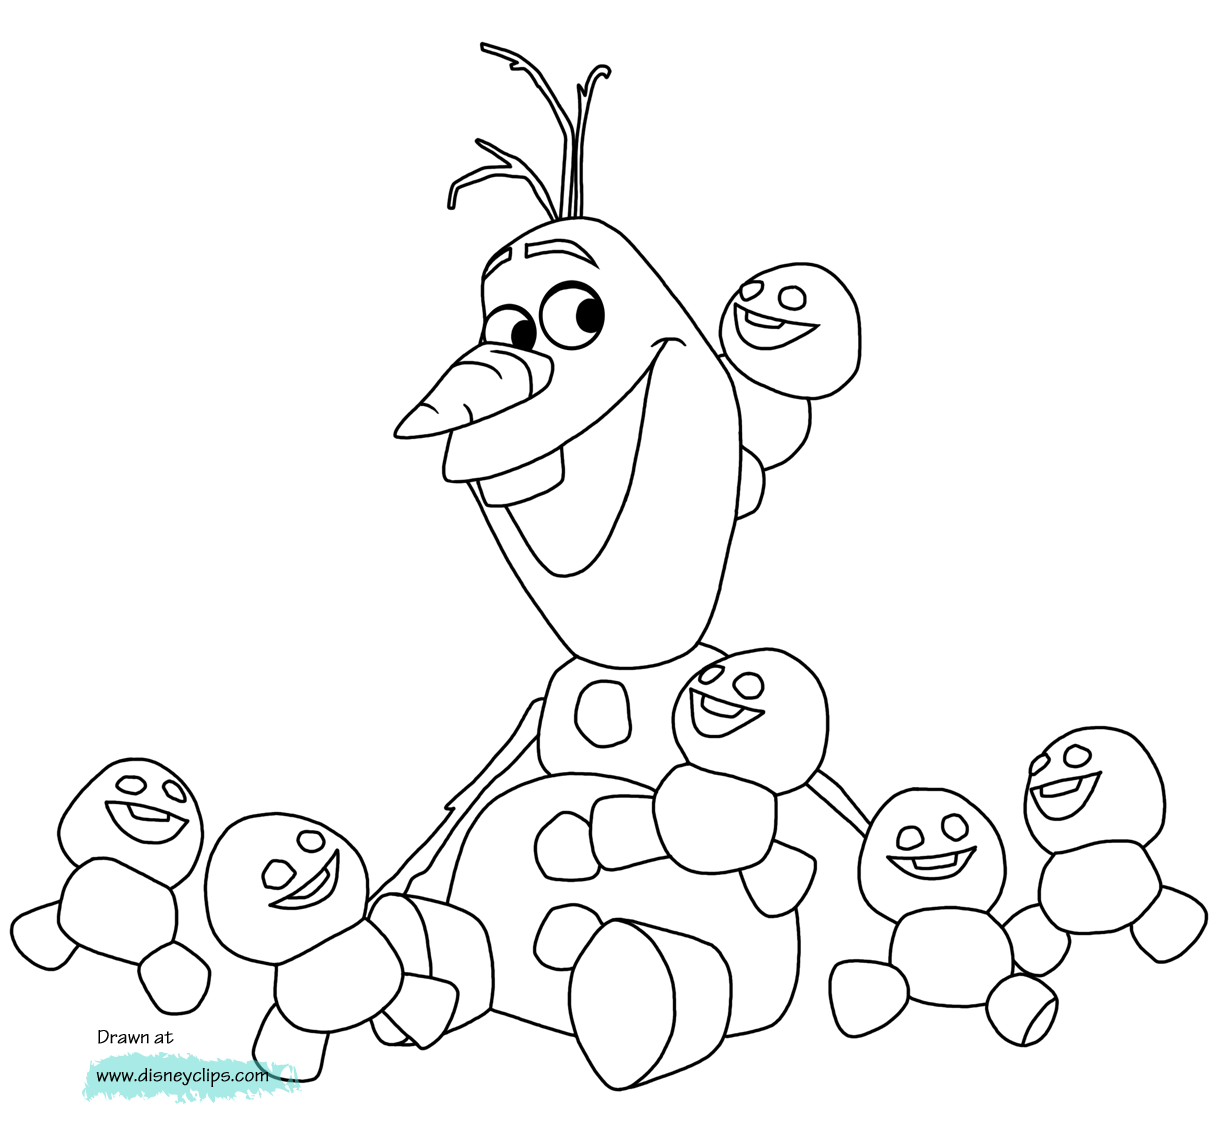 pictures of olaf from frozen olaf coloring pages getcoloringpagescom olaf of from pictures frozen 